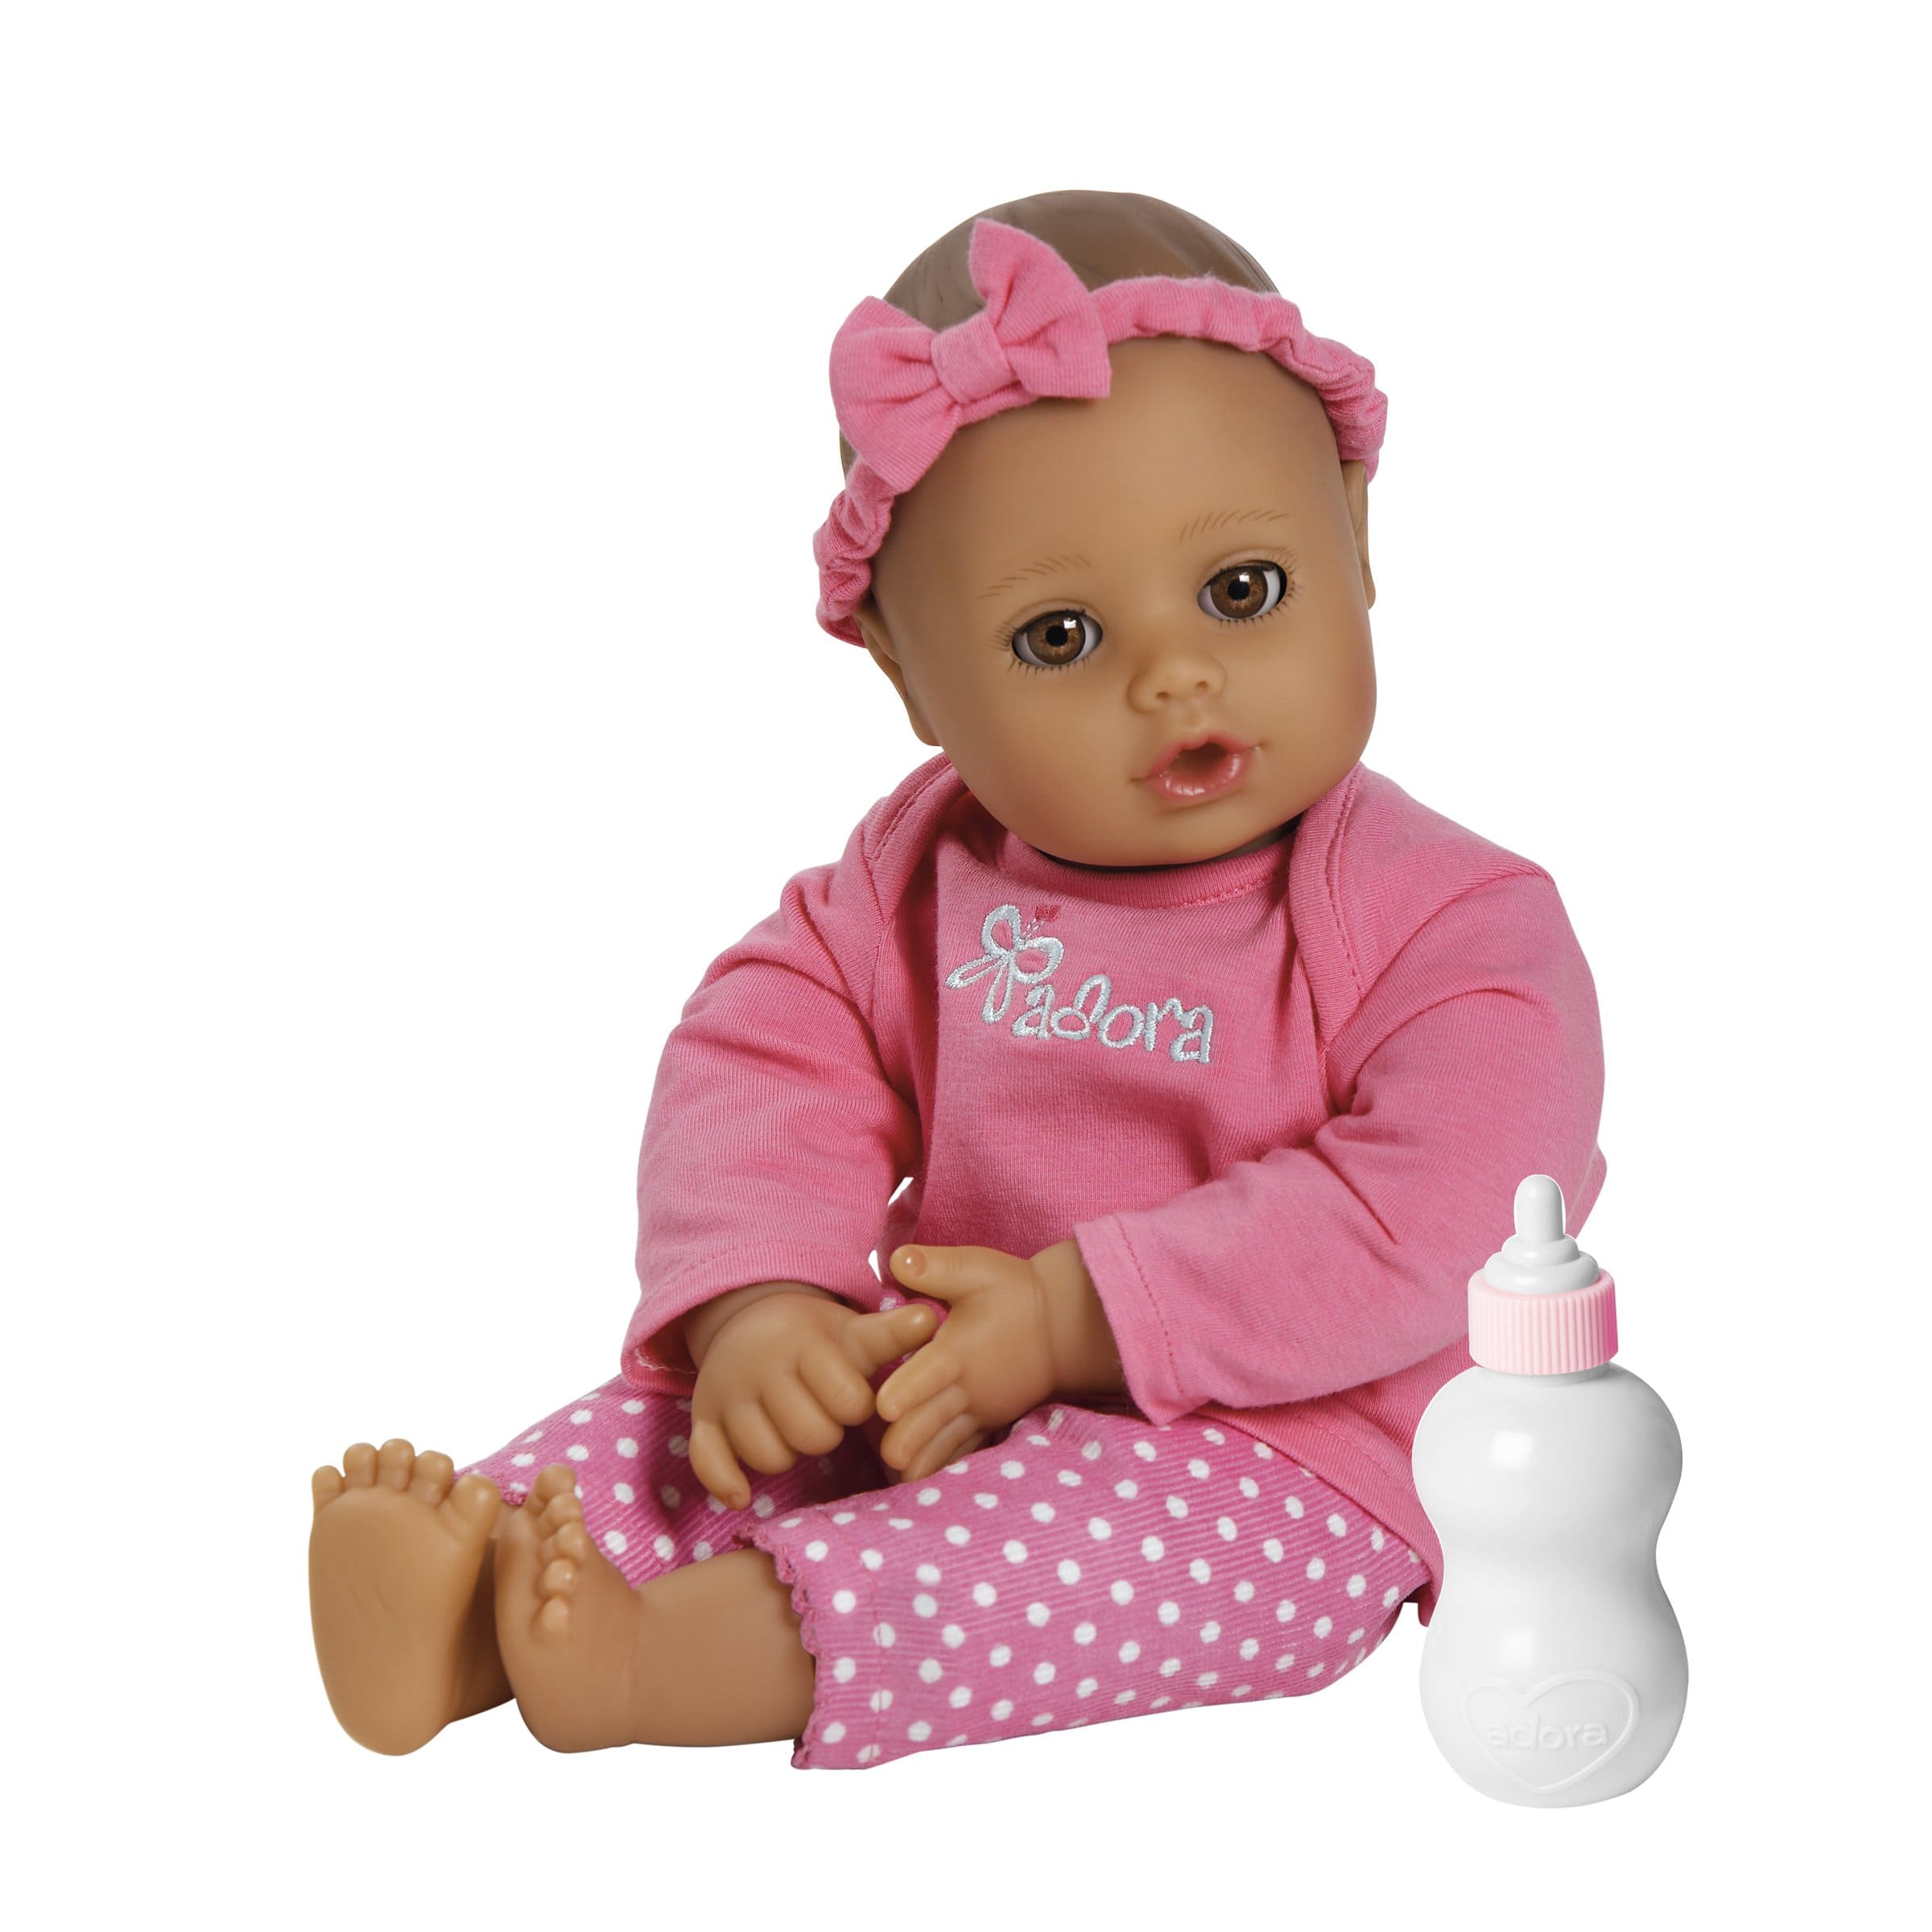 Babi Baby Doll - Gray-Blue Eyes and Pink Hat 14-inch Baby Doll with Pink  PJs